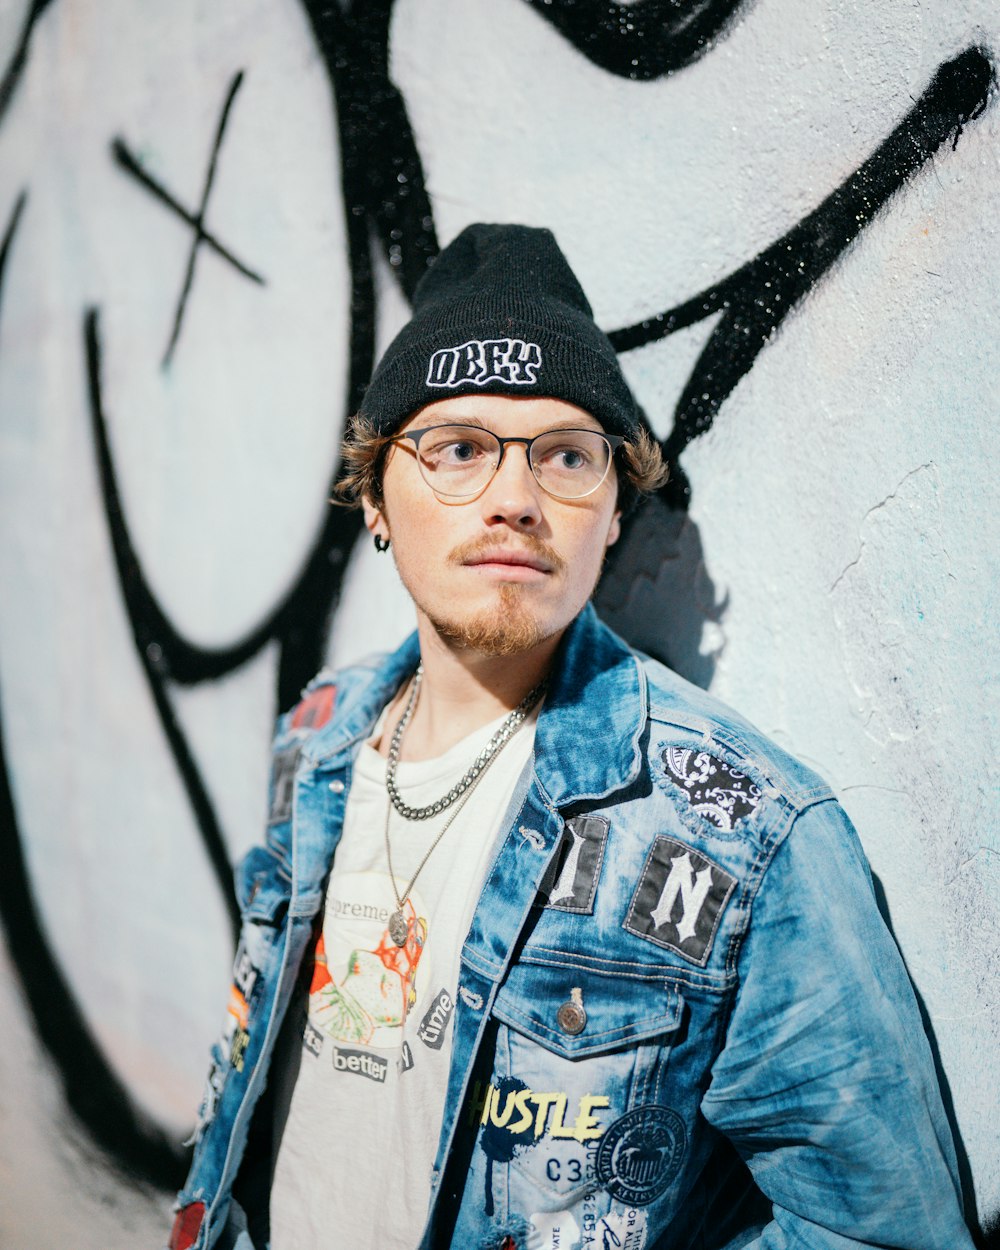 a man wearing glasses and a denim jacket standing in front of a wall with graffiti